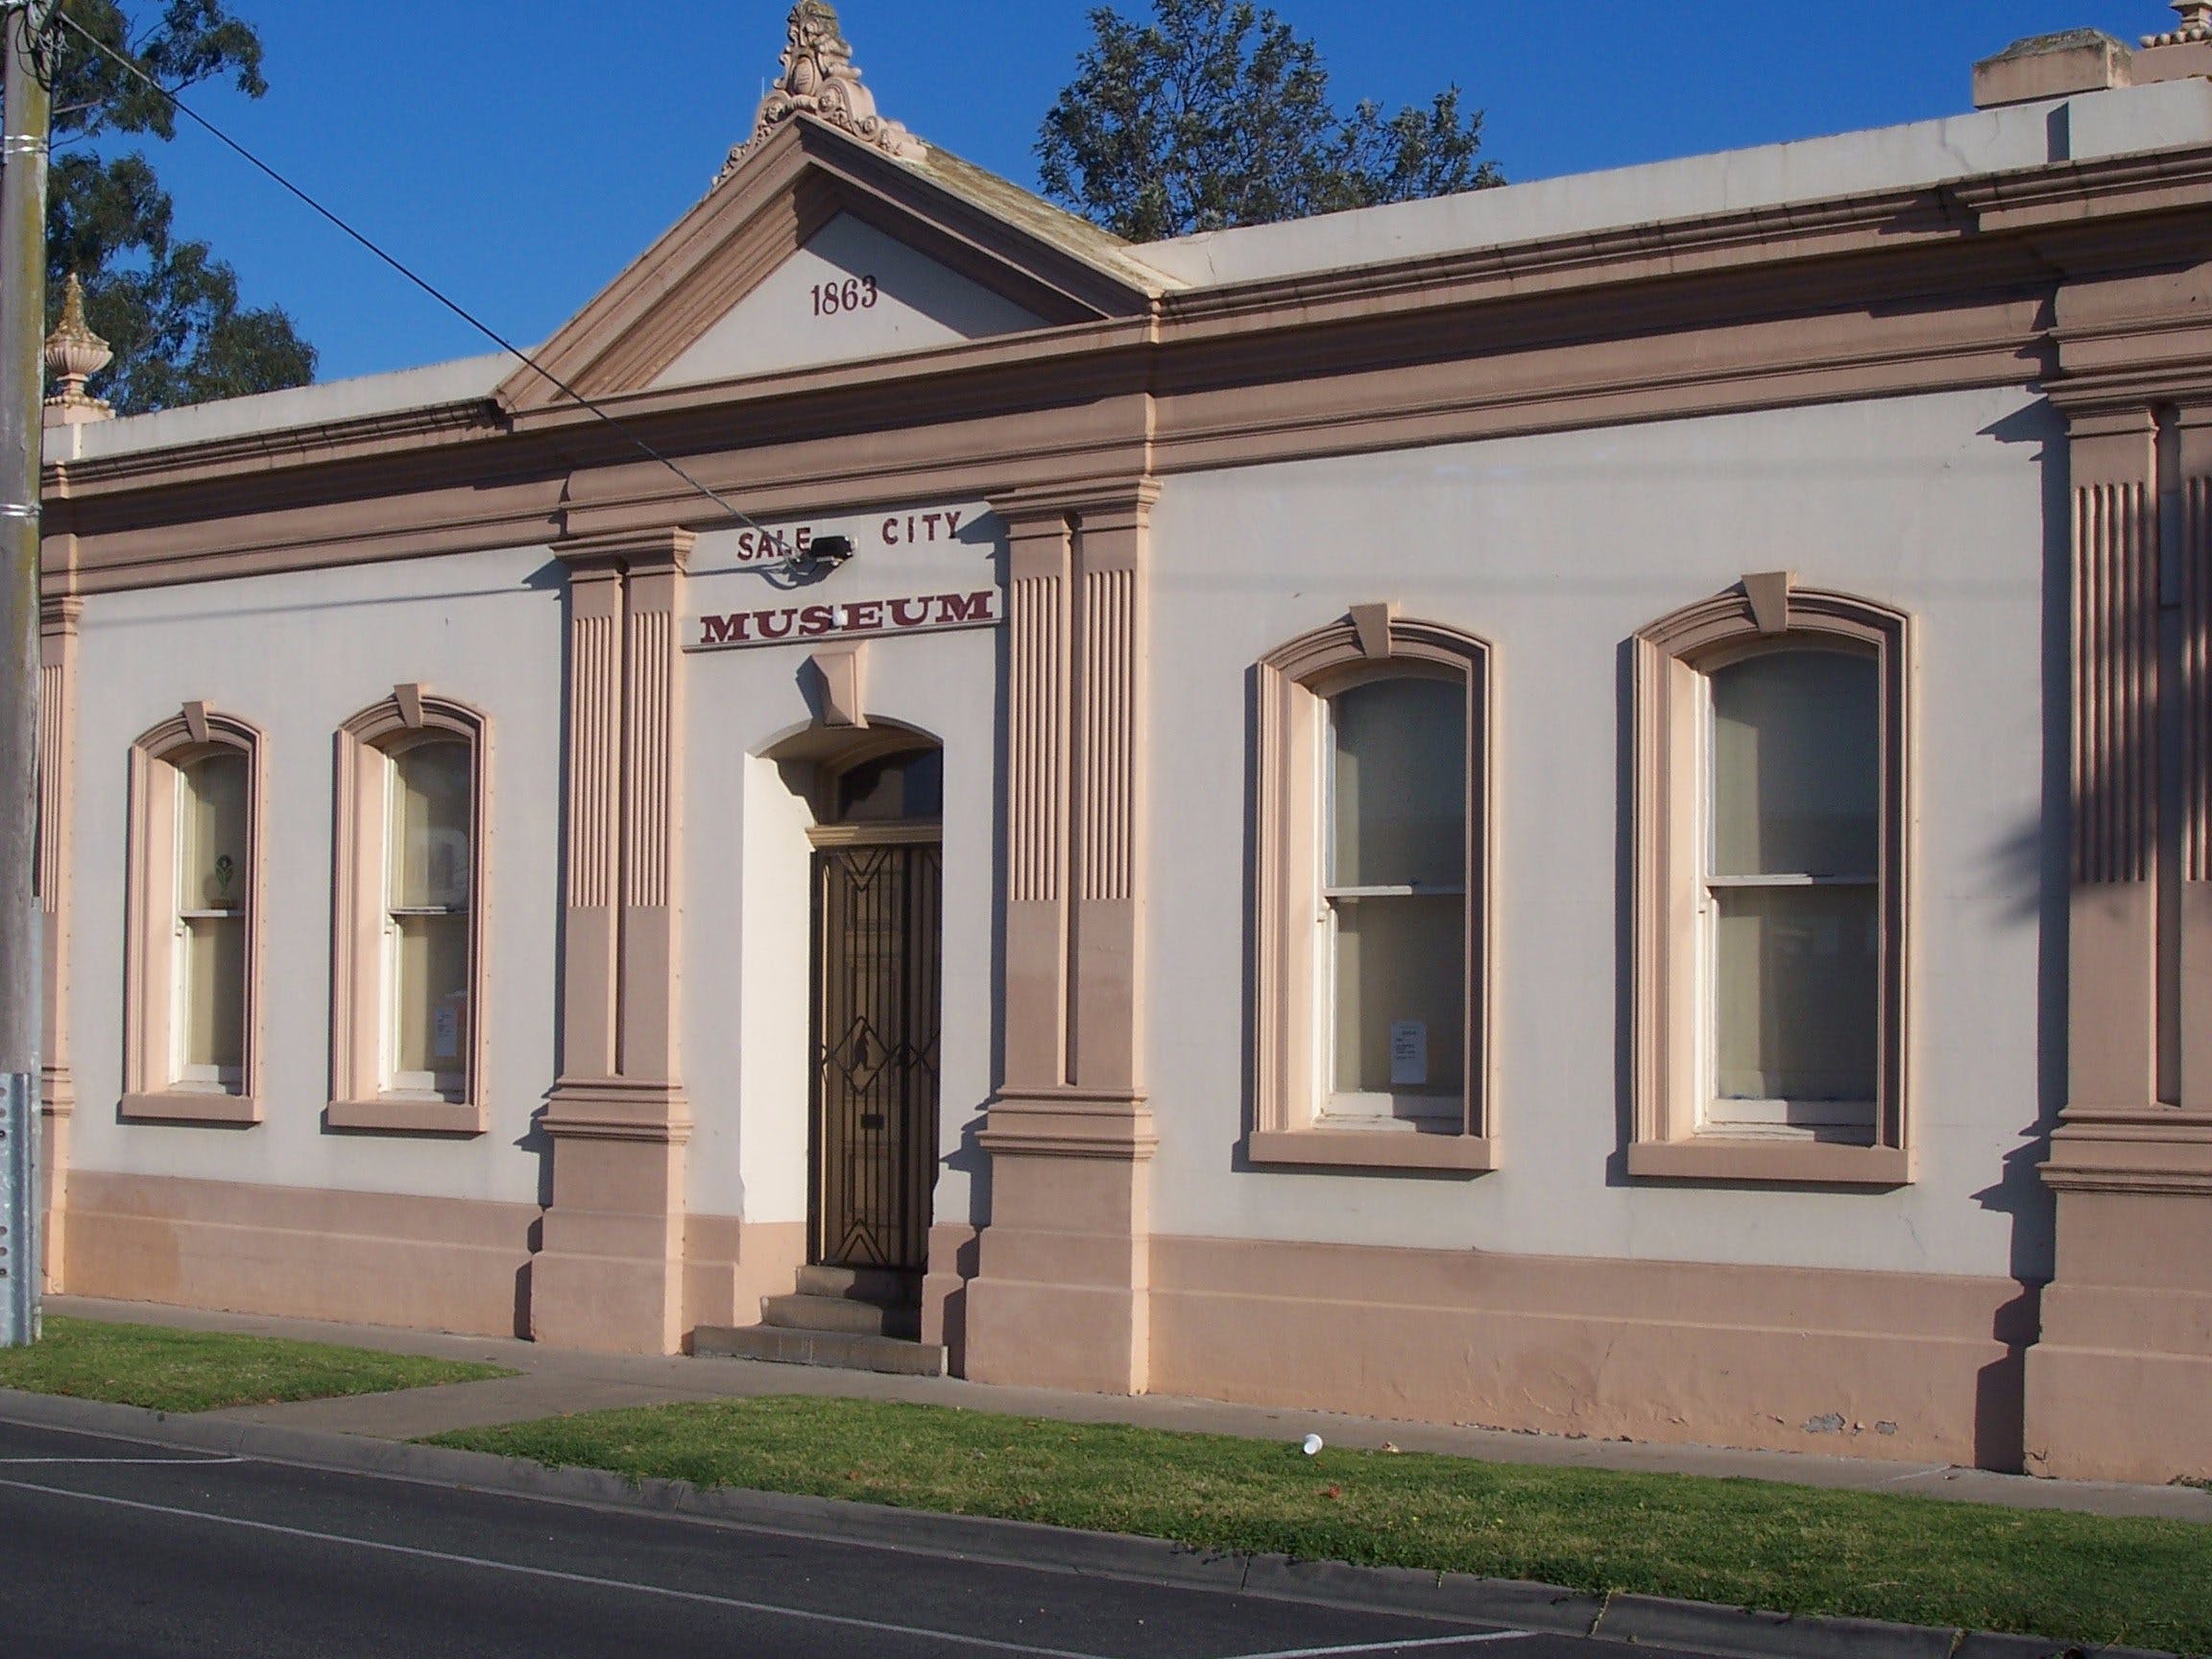 Sale Historical Museum - Accommodation Georgetown